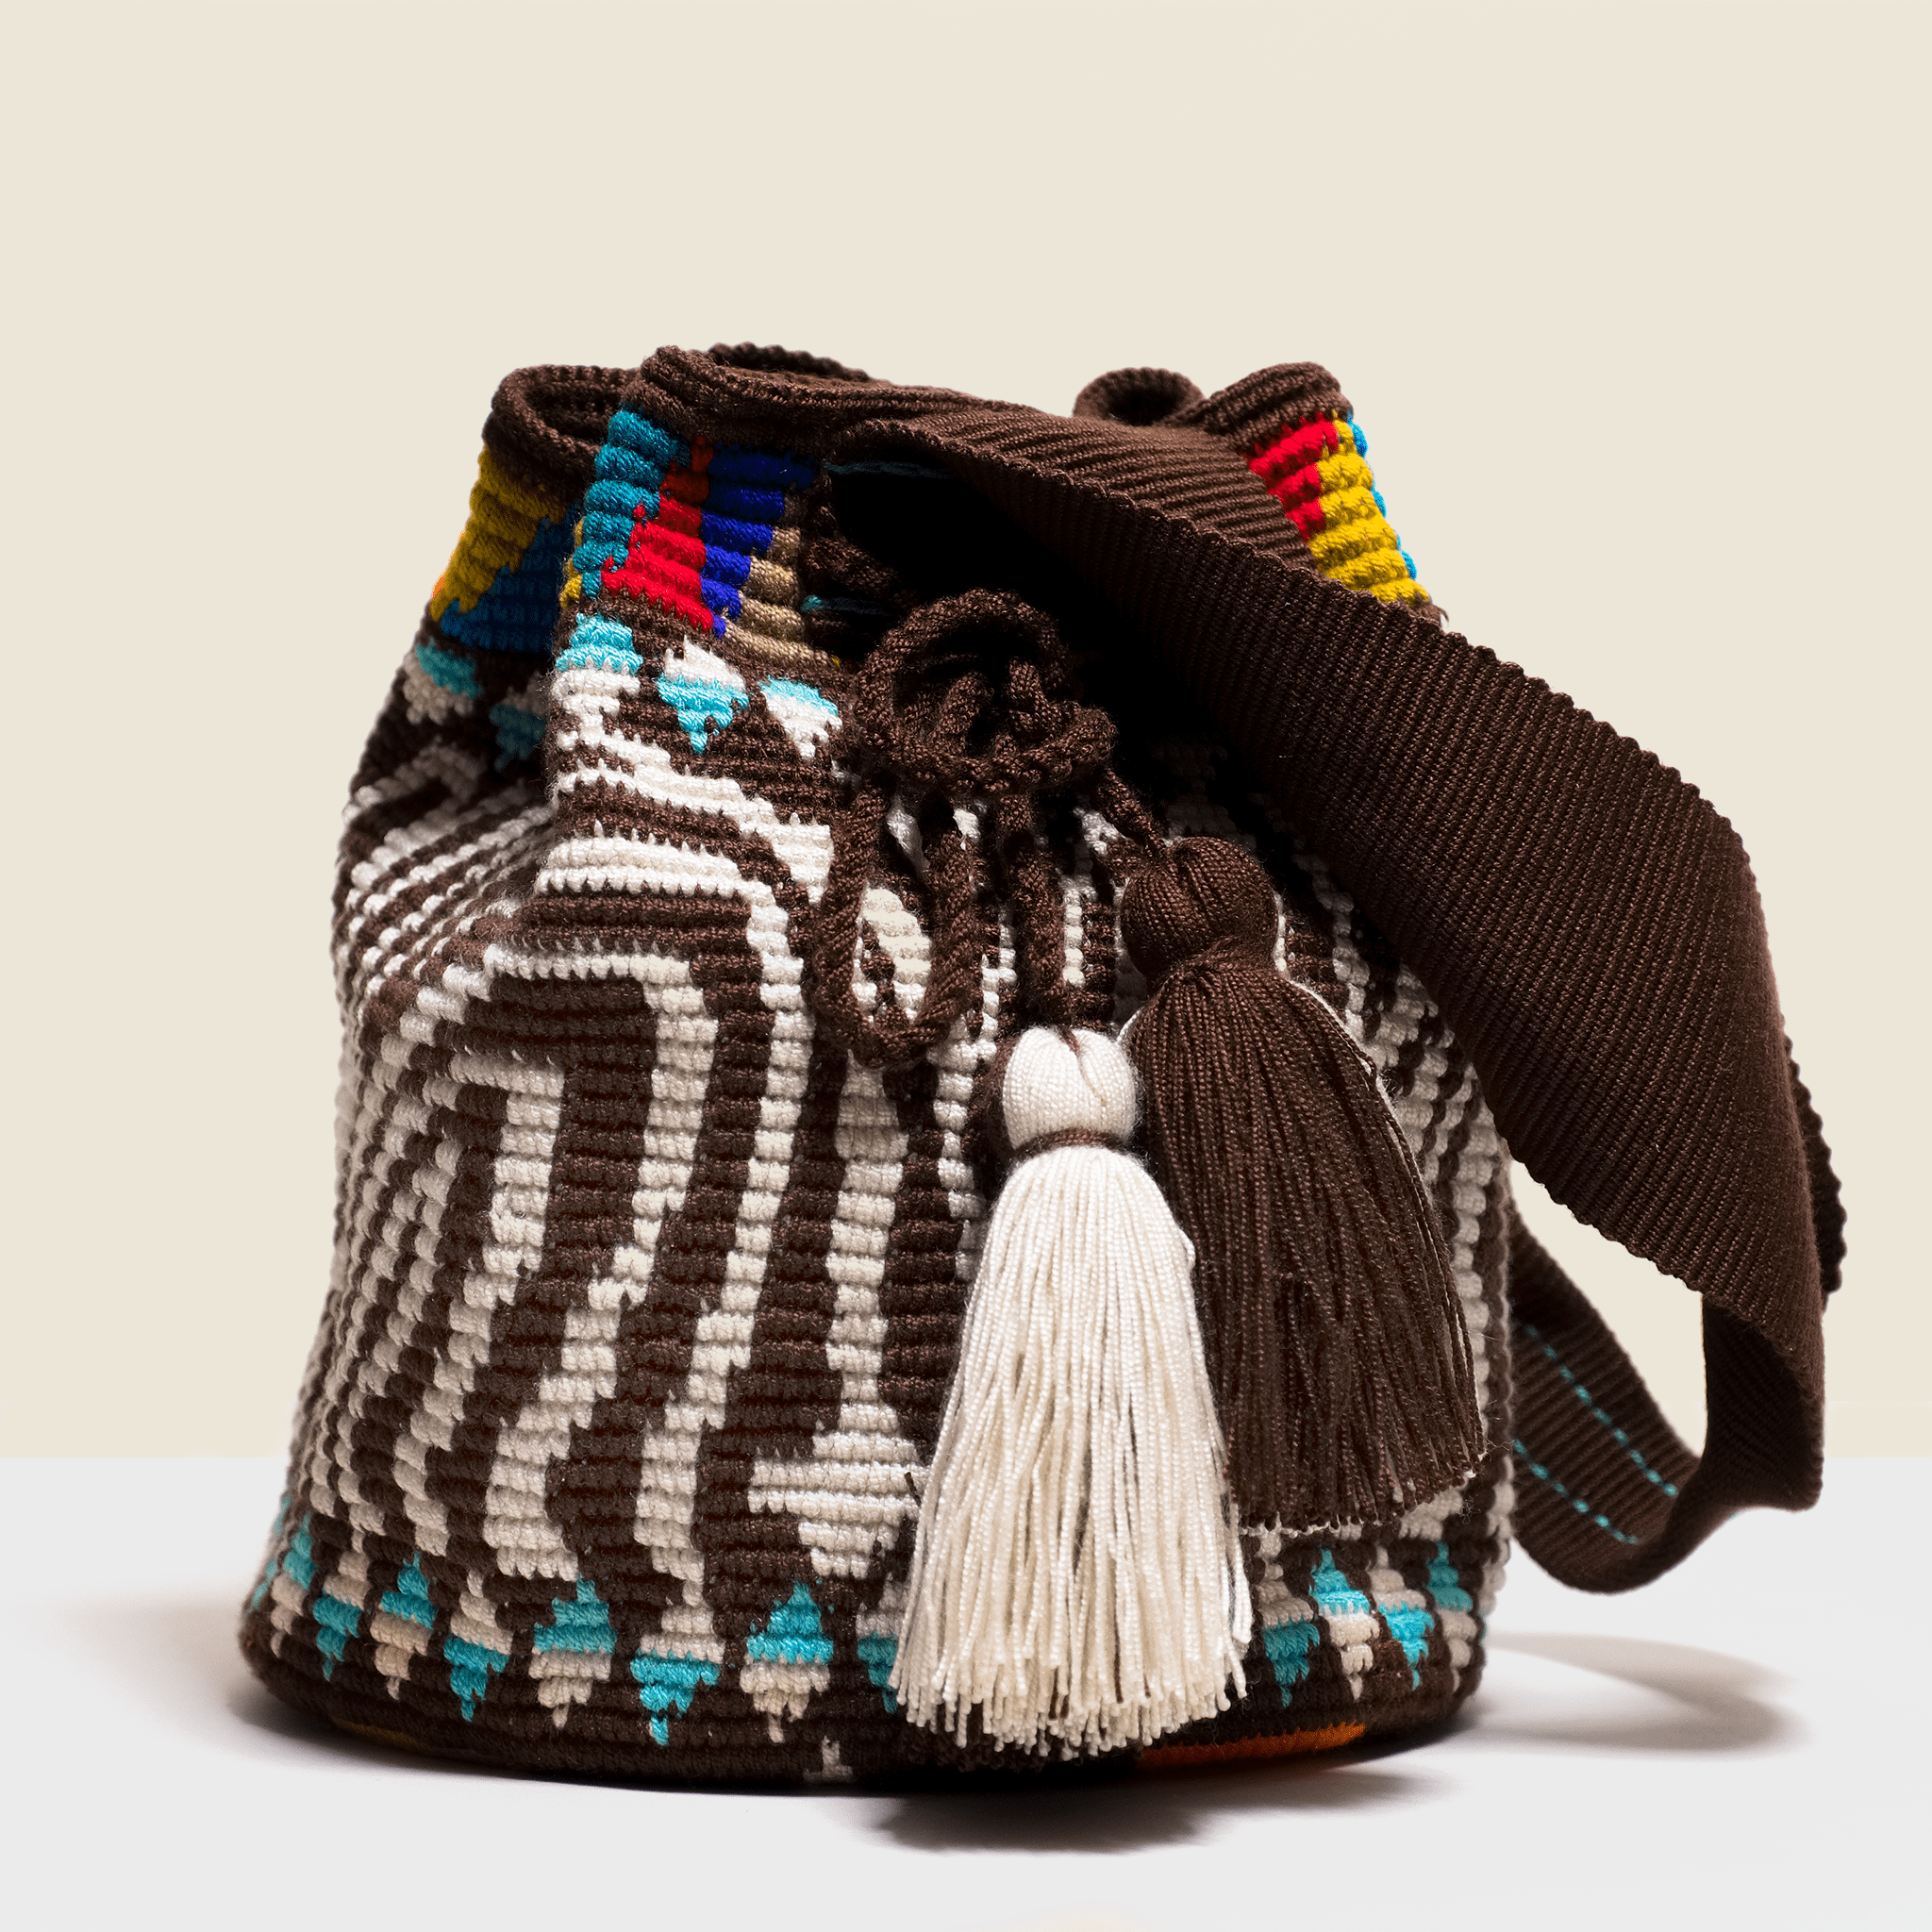 Boho chic bag with tassels. Brown and cream design 